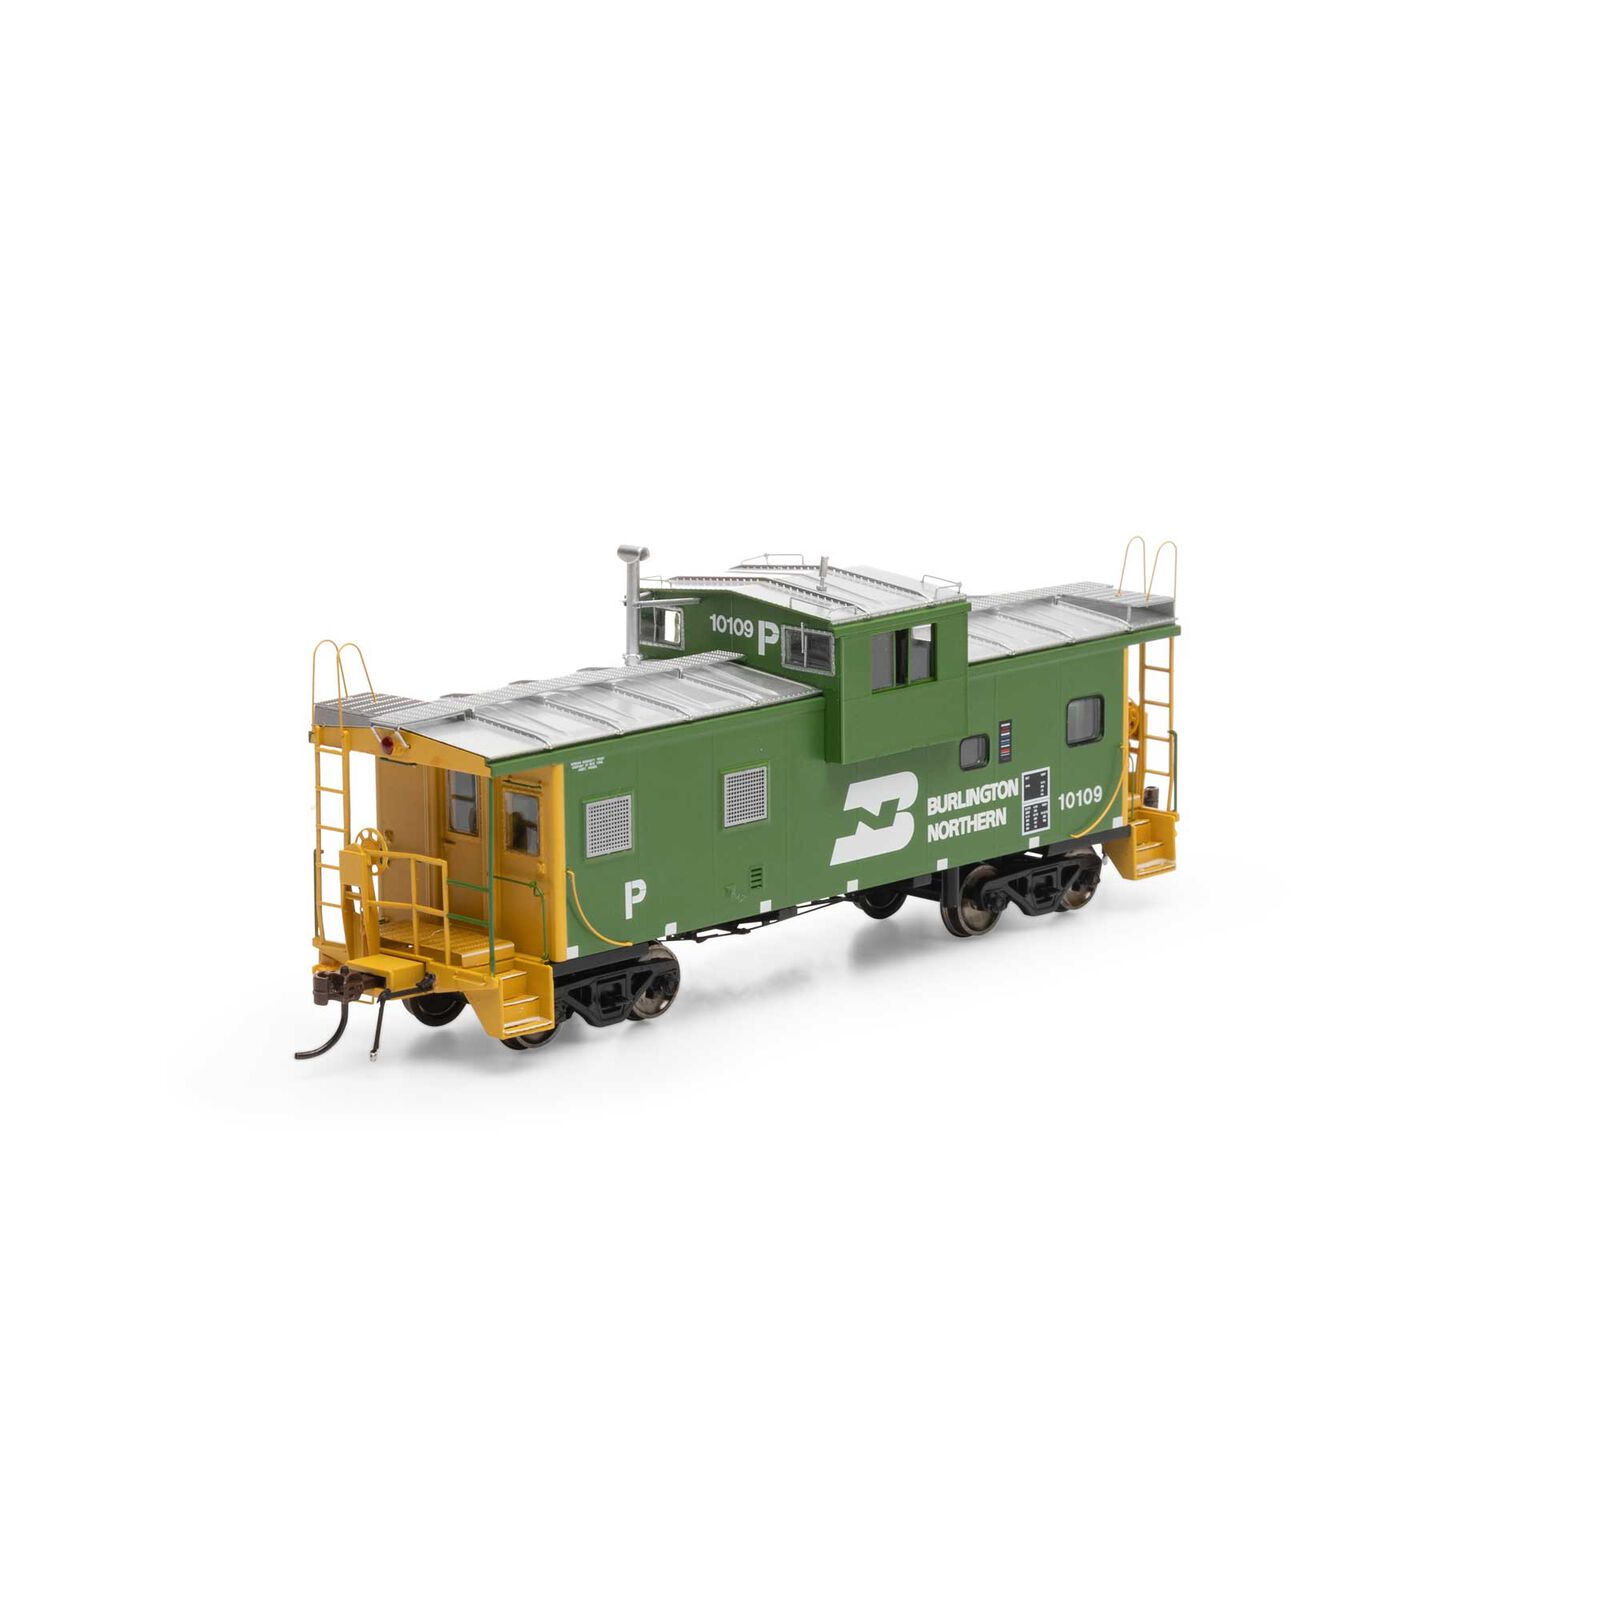 HO ICC Caboose with Lights & Sound, BN #10109